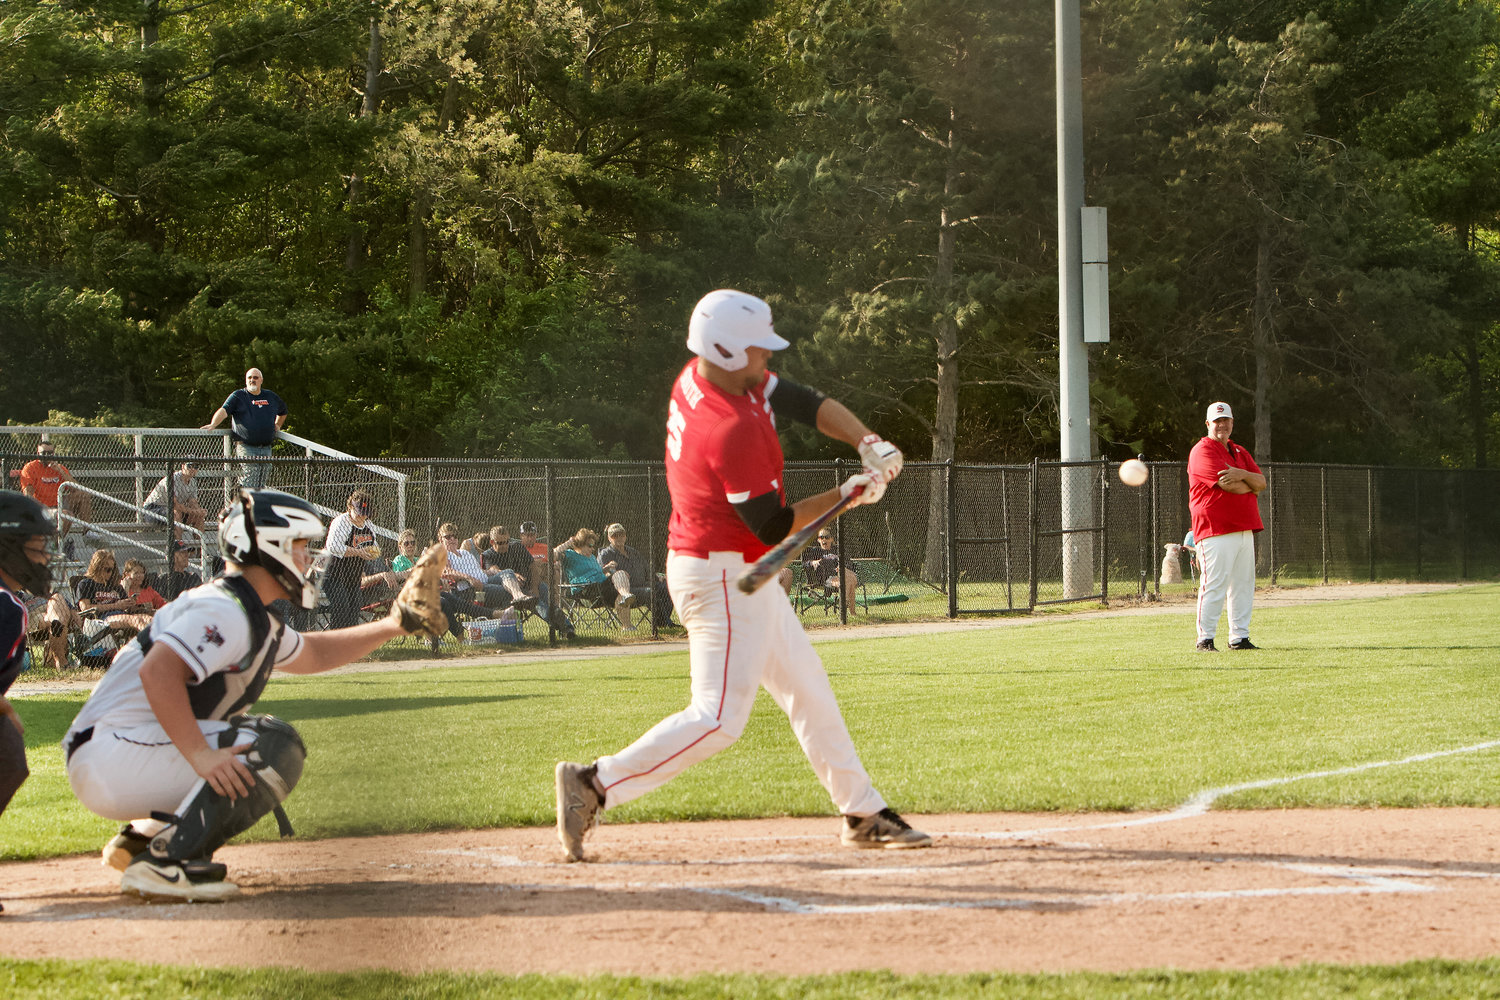 Mason hall collected a hit for the Mounties.